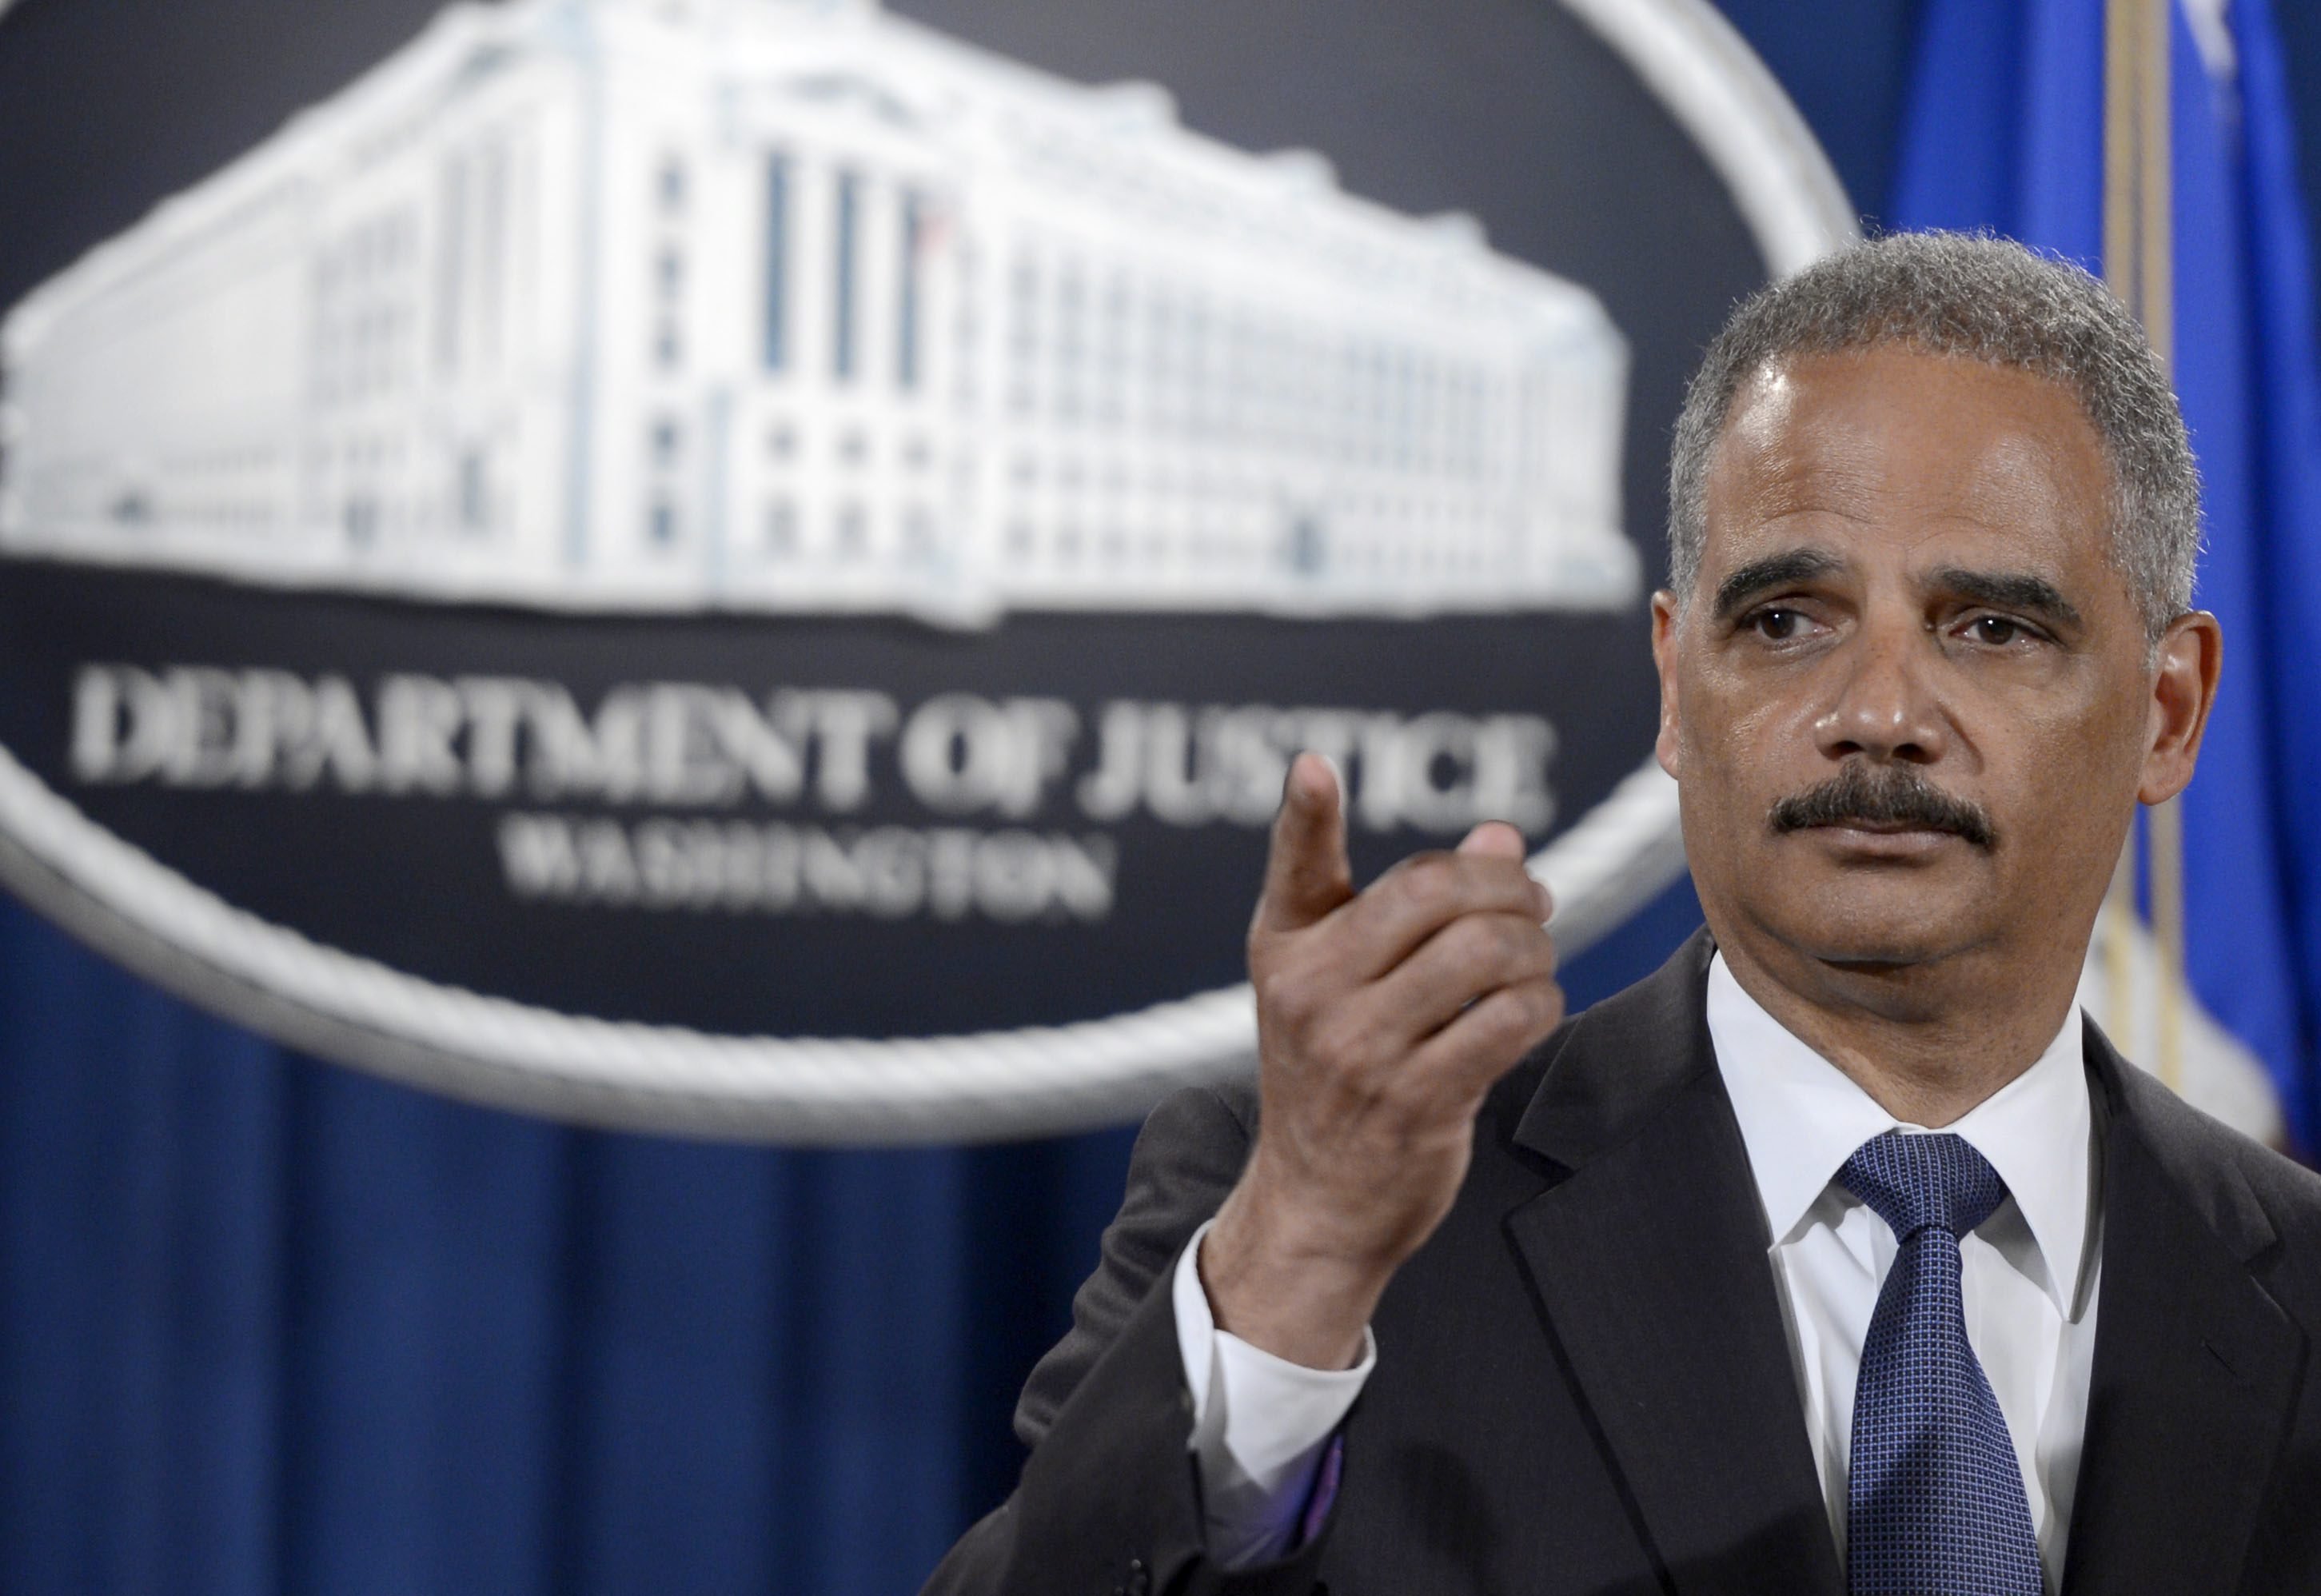 US Attorney General Eric Holder delivers remarks on the Justice Department’s efforts in Ferguson, Missouri.